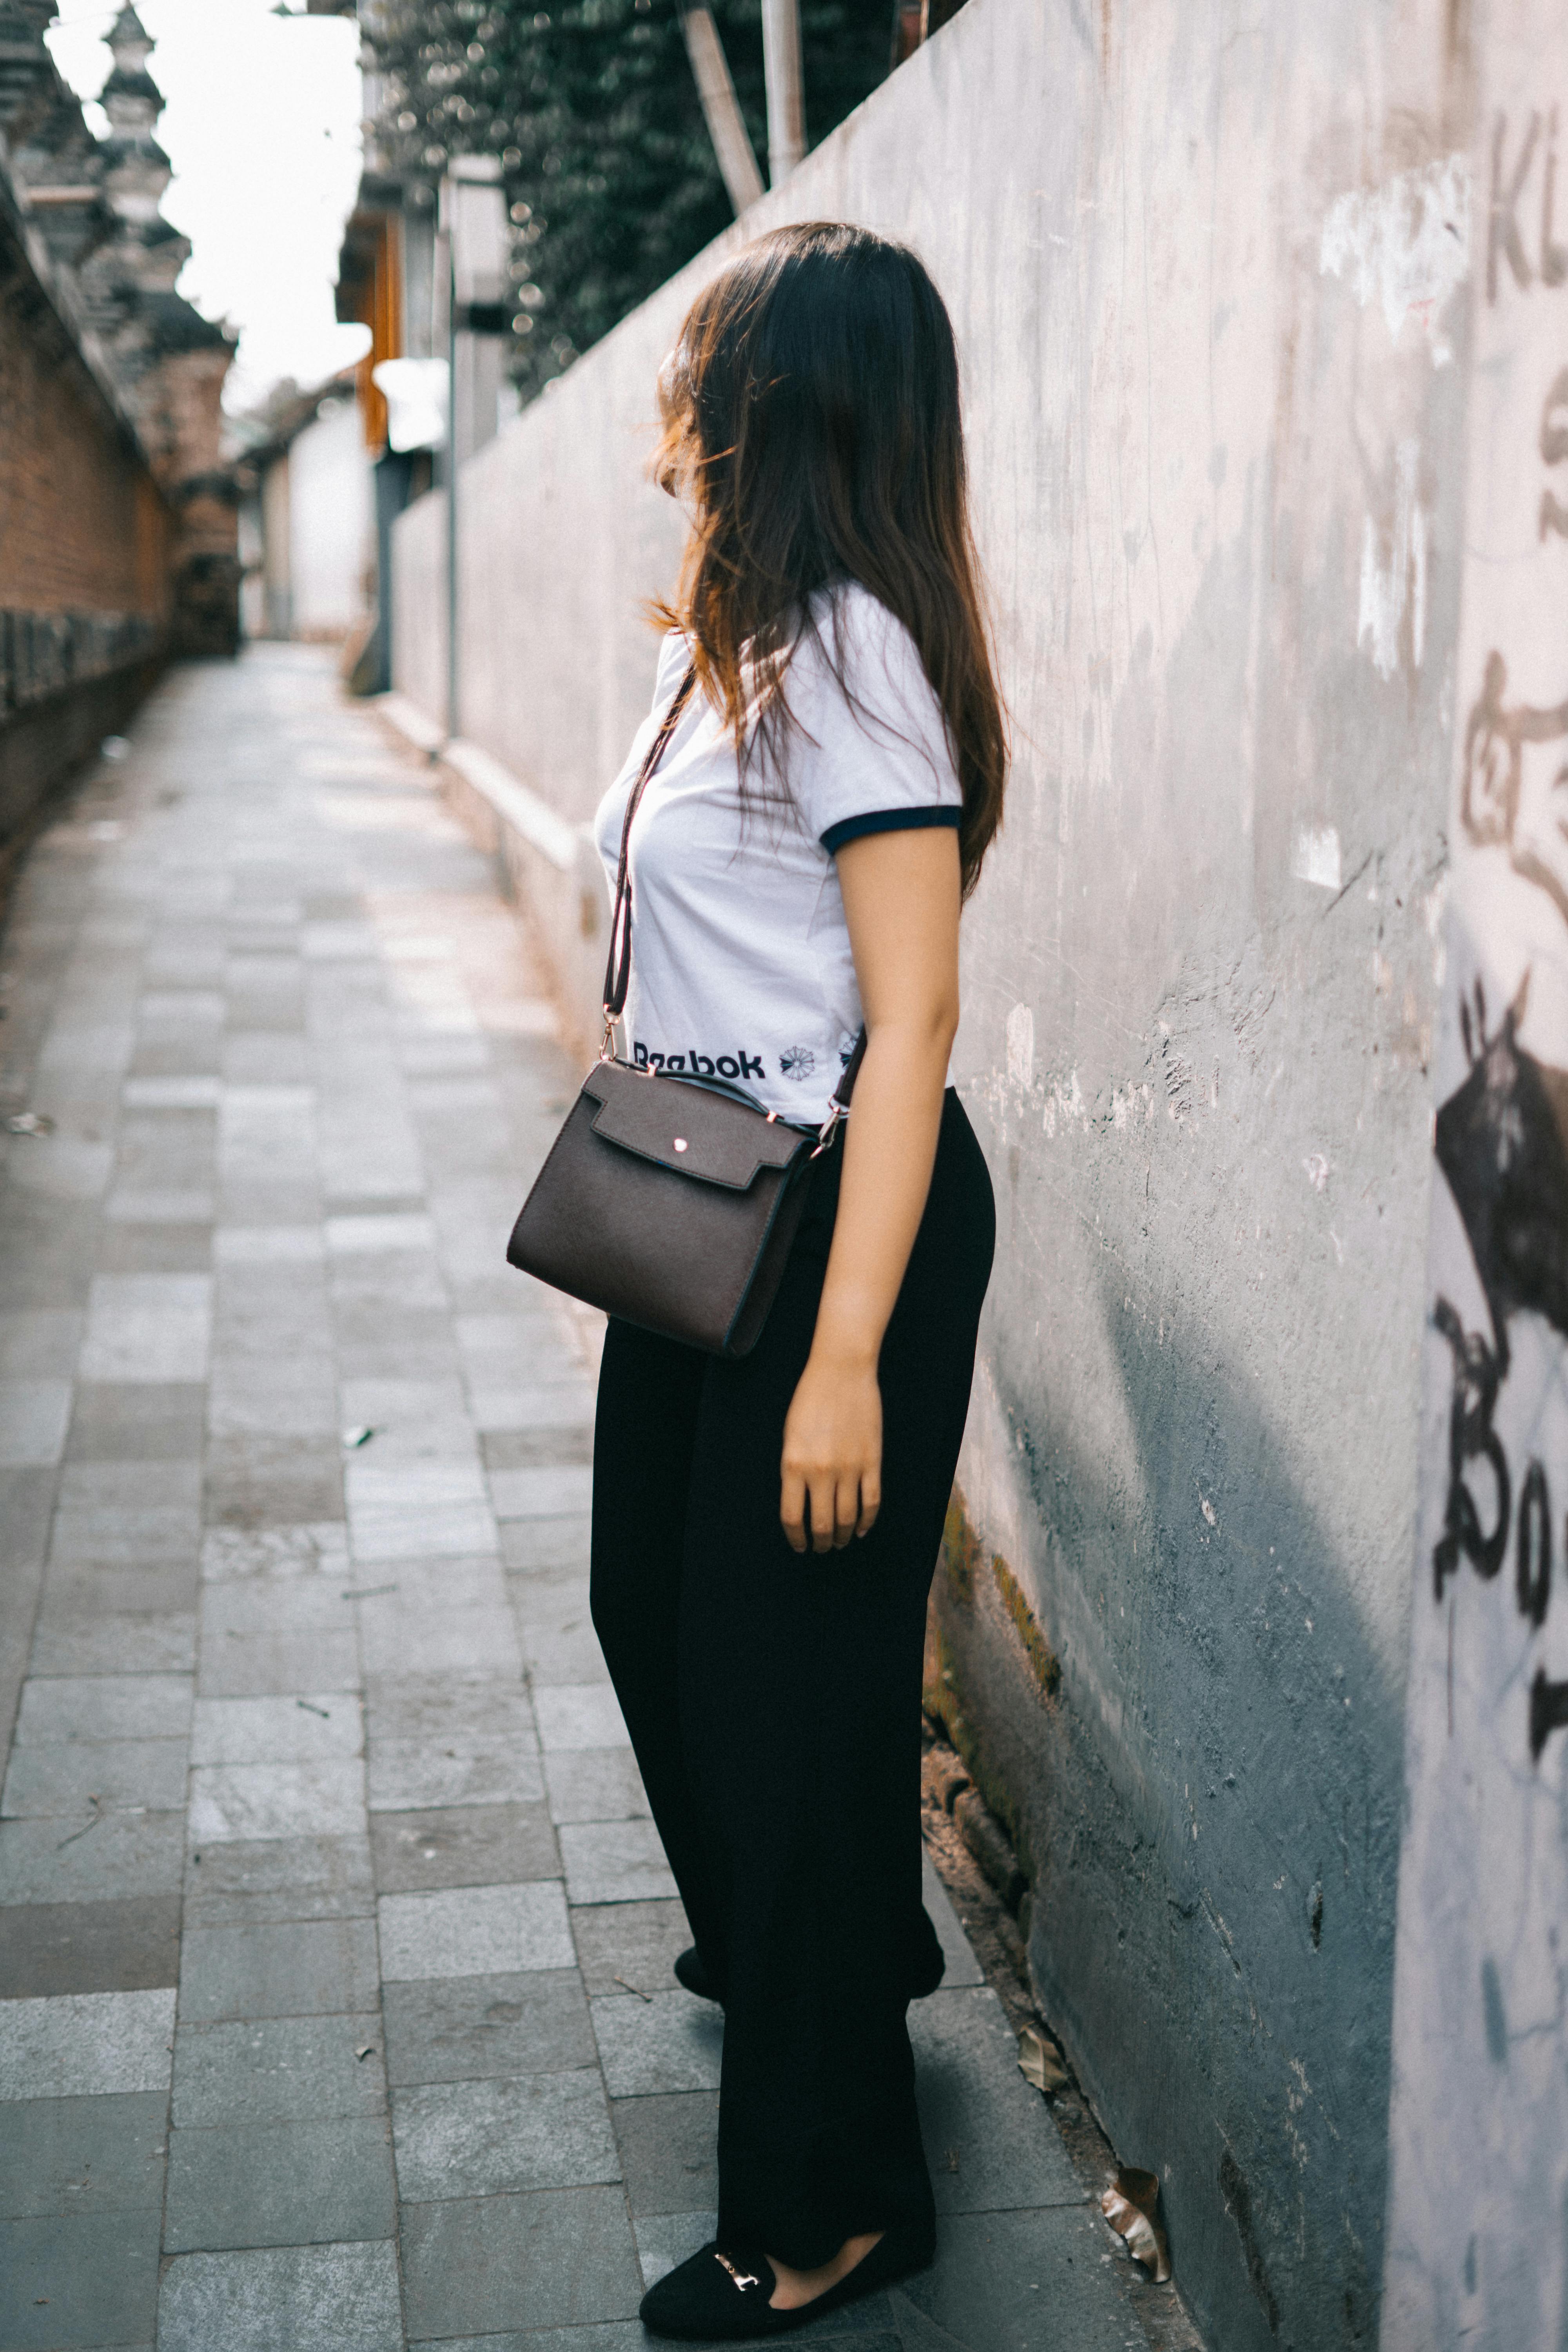 Afdeling fajance Citron Woman Wearing Black and White T-shirt and Black Pants · Free Stock Photo